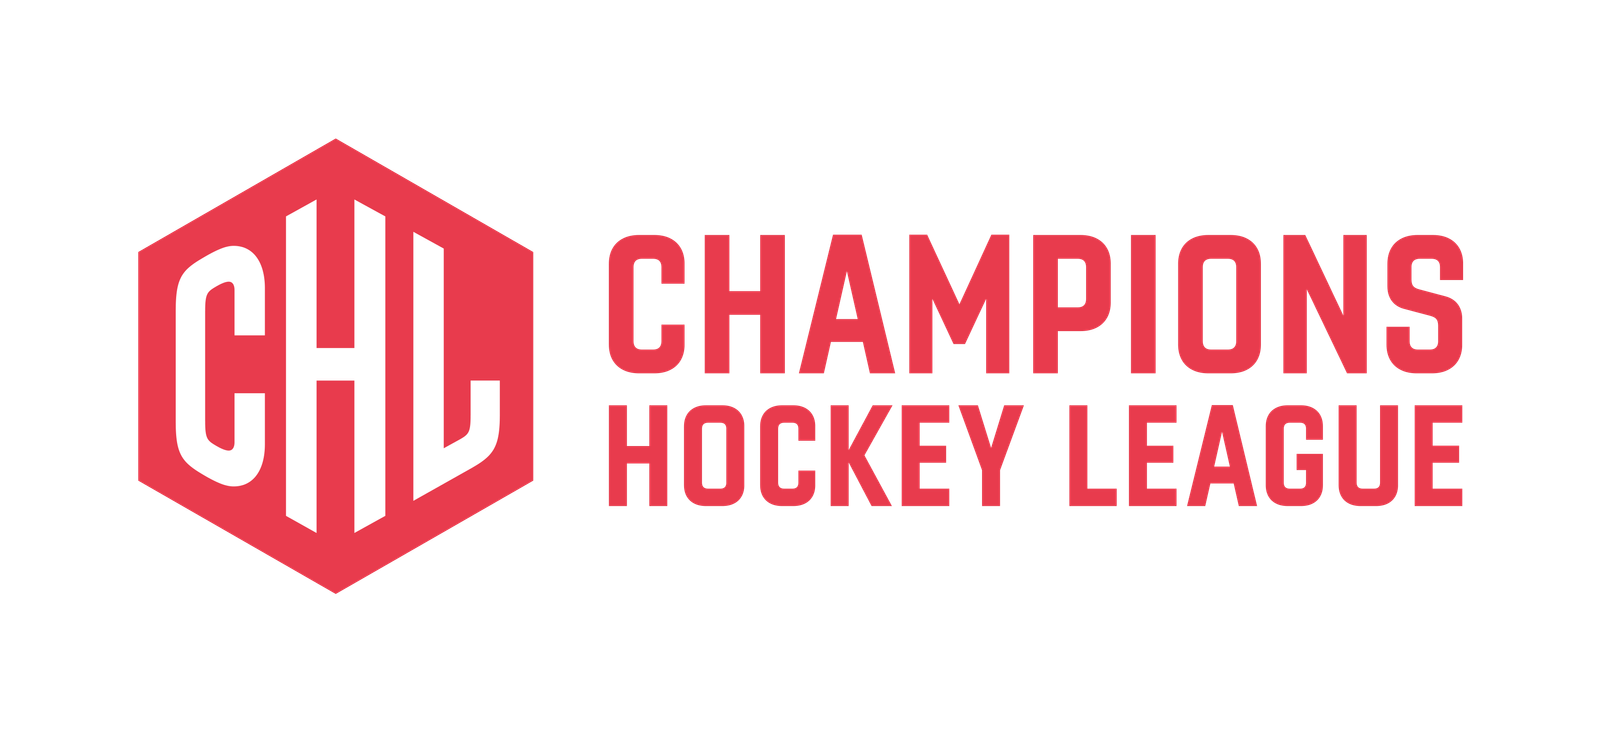 The NHL should join the Champions Hockey League